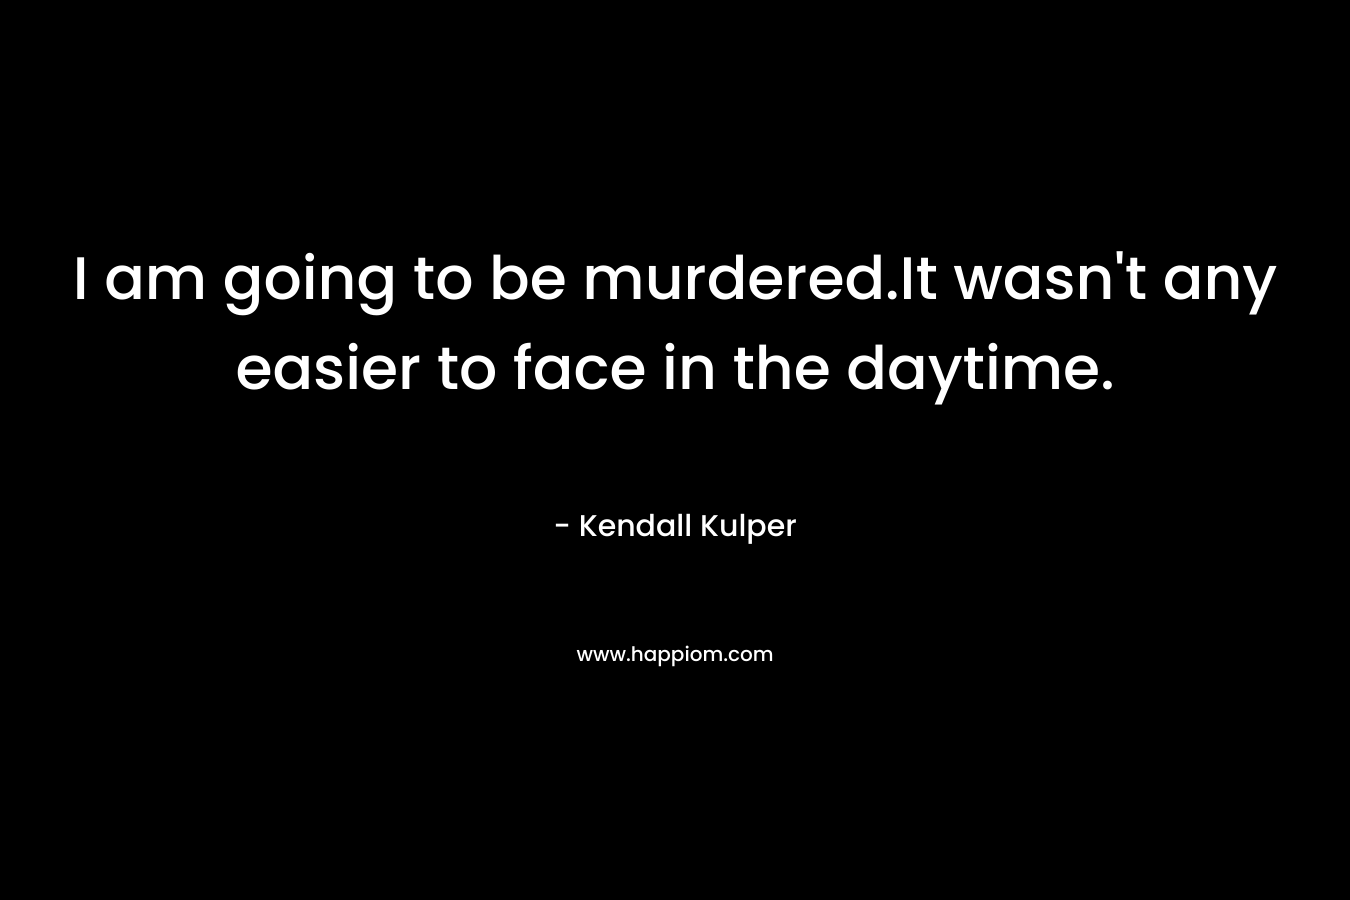 I am going to be murdered.It wasn’t any easier to face in the daytime. – Kendall Kulper